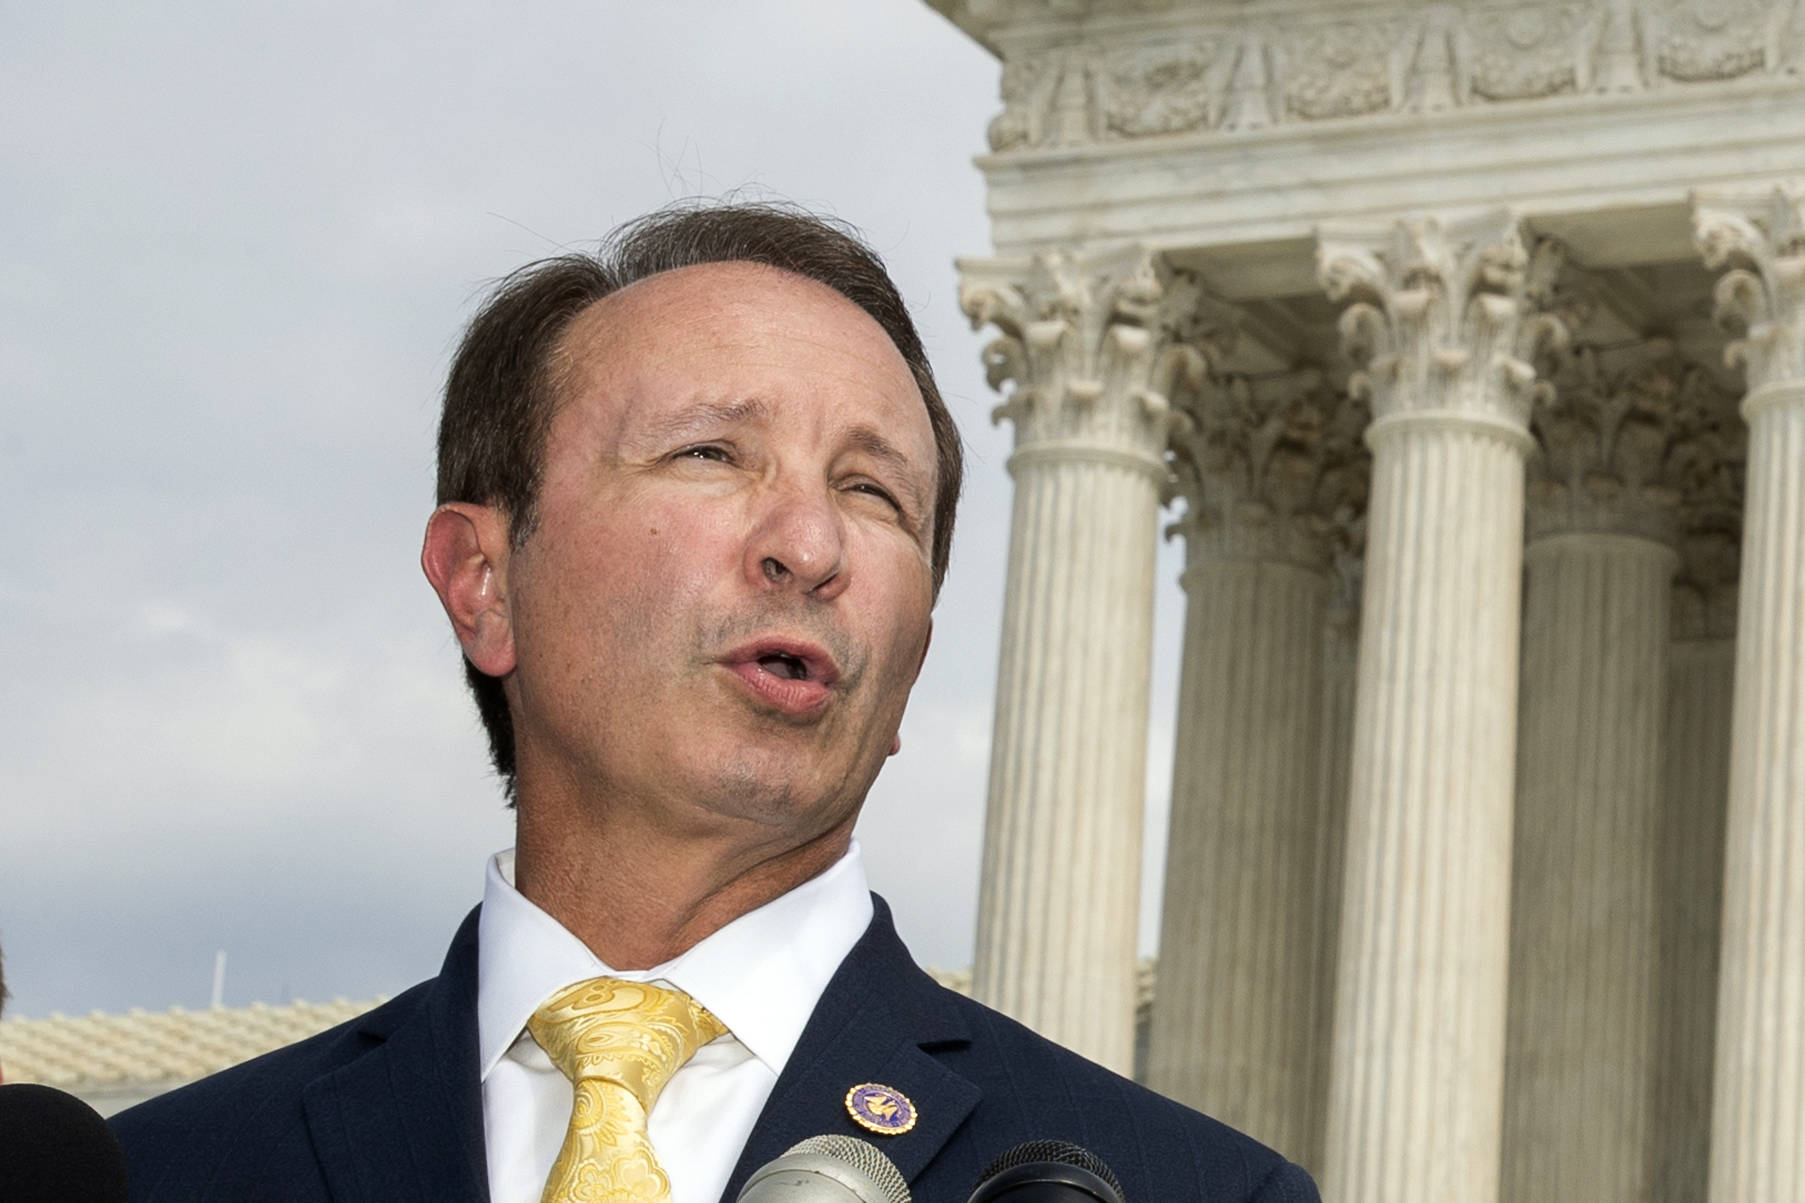 In this Sept. 9, 2019, file photo, Louisiana Attorney General Jeff Landry speaks in front of the U.S. Supreme Court in Washington. The Biden administration’s suspension of new oil and gas leases on federal land and water was blocked Tuesday, June 15, 2021, by a federal judge in Louisiana. U.S. District Judge Terry Doughty’s ruling came in a lawsuit filed in March by Louisiana’s Republican attorney general, Jeff Landry and officials in 12 other states. Doughty’s ruling granting a preliminary injunction to those states said his order applies nationwide. (AP Photo/Manuel Balce Ceneta, File)